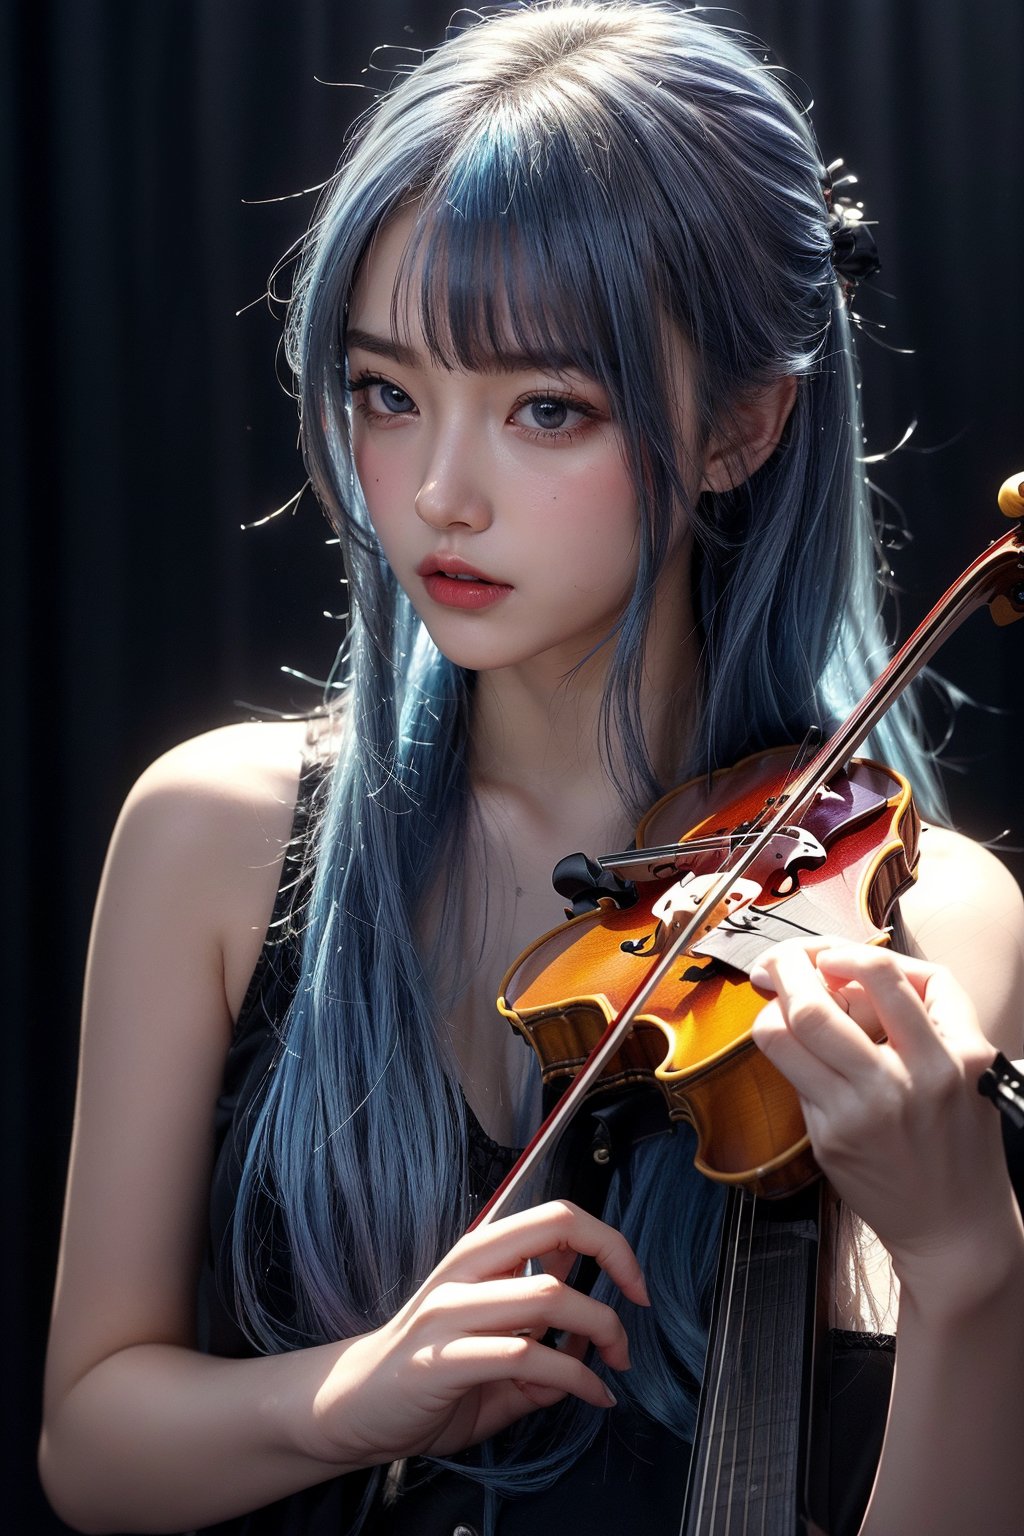 (3_characters),(((1girl playing a Gibson Les Paul e-guitar in a standing position))),(((1 realistic drummer with blue hair in the background and 1 girl with violet hair is playing violin))),(((realistic Gibson_Les_Paul_e-Guitar))), in background seeing many music instruments like violin_contrabass,piano,flutes,oboe,percussion,(realistic instruments)))),(((on the ground seeing some realistic_guitar_foot_pedal_devices))),((smooth light,red light ambience)), (gloomy), ((the girl has green hair and green eyes, closed mouth, smile, (((full_body)))), fantasy, aesthetic, (masterpiece, best quality, highres), trending on pixiv, solo, (((good hands))), ((anime_screencap)), perfect anime anatomy, ,ARYSTYLE3,